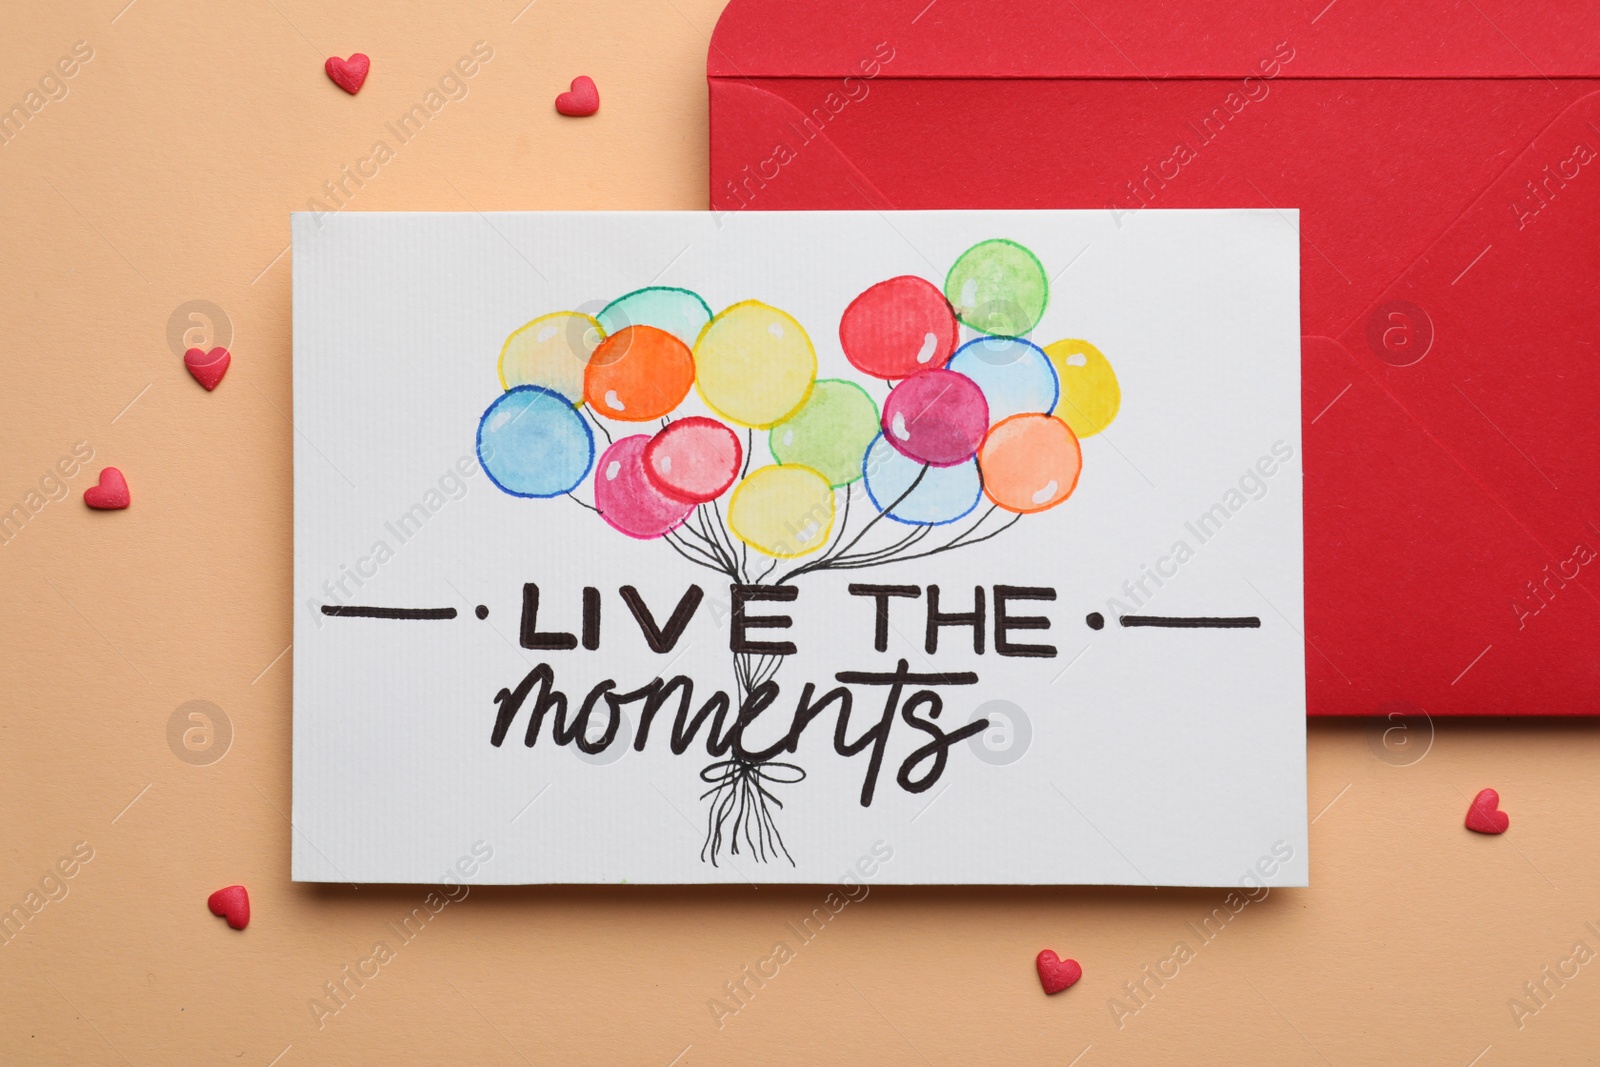 Photo of Card with phrase Live The Moments and red envelope on beige background, flat lay